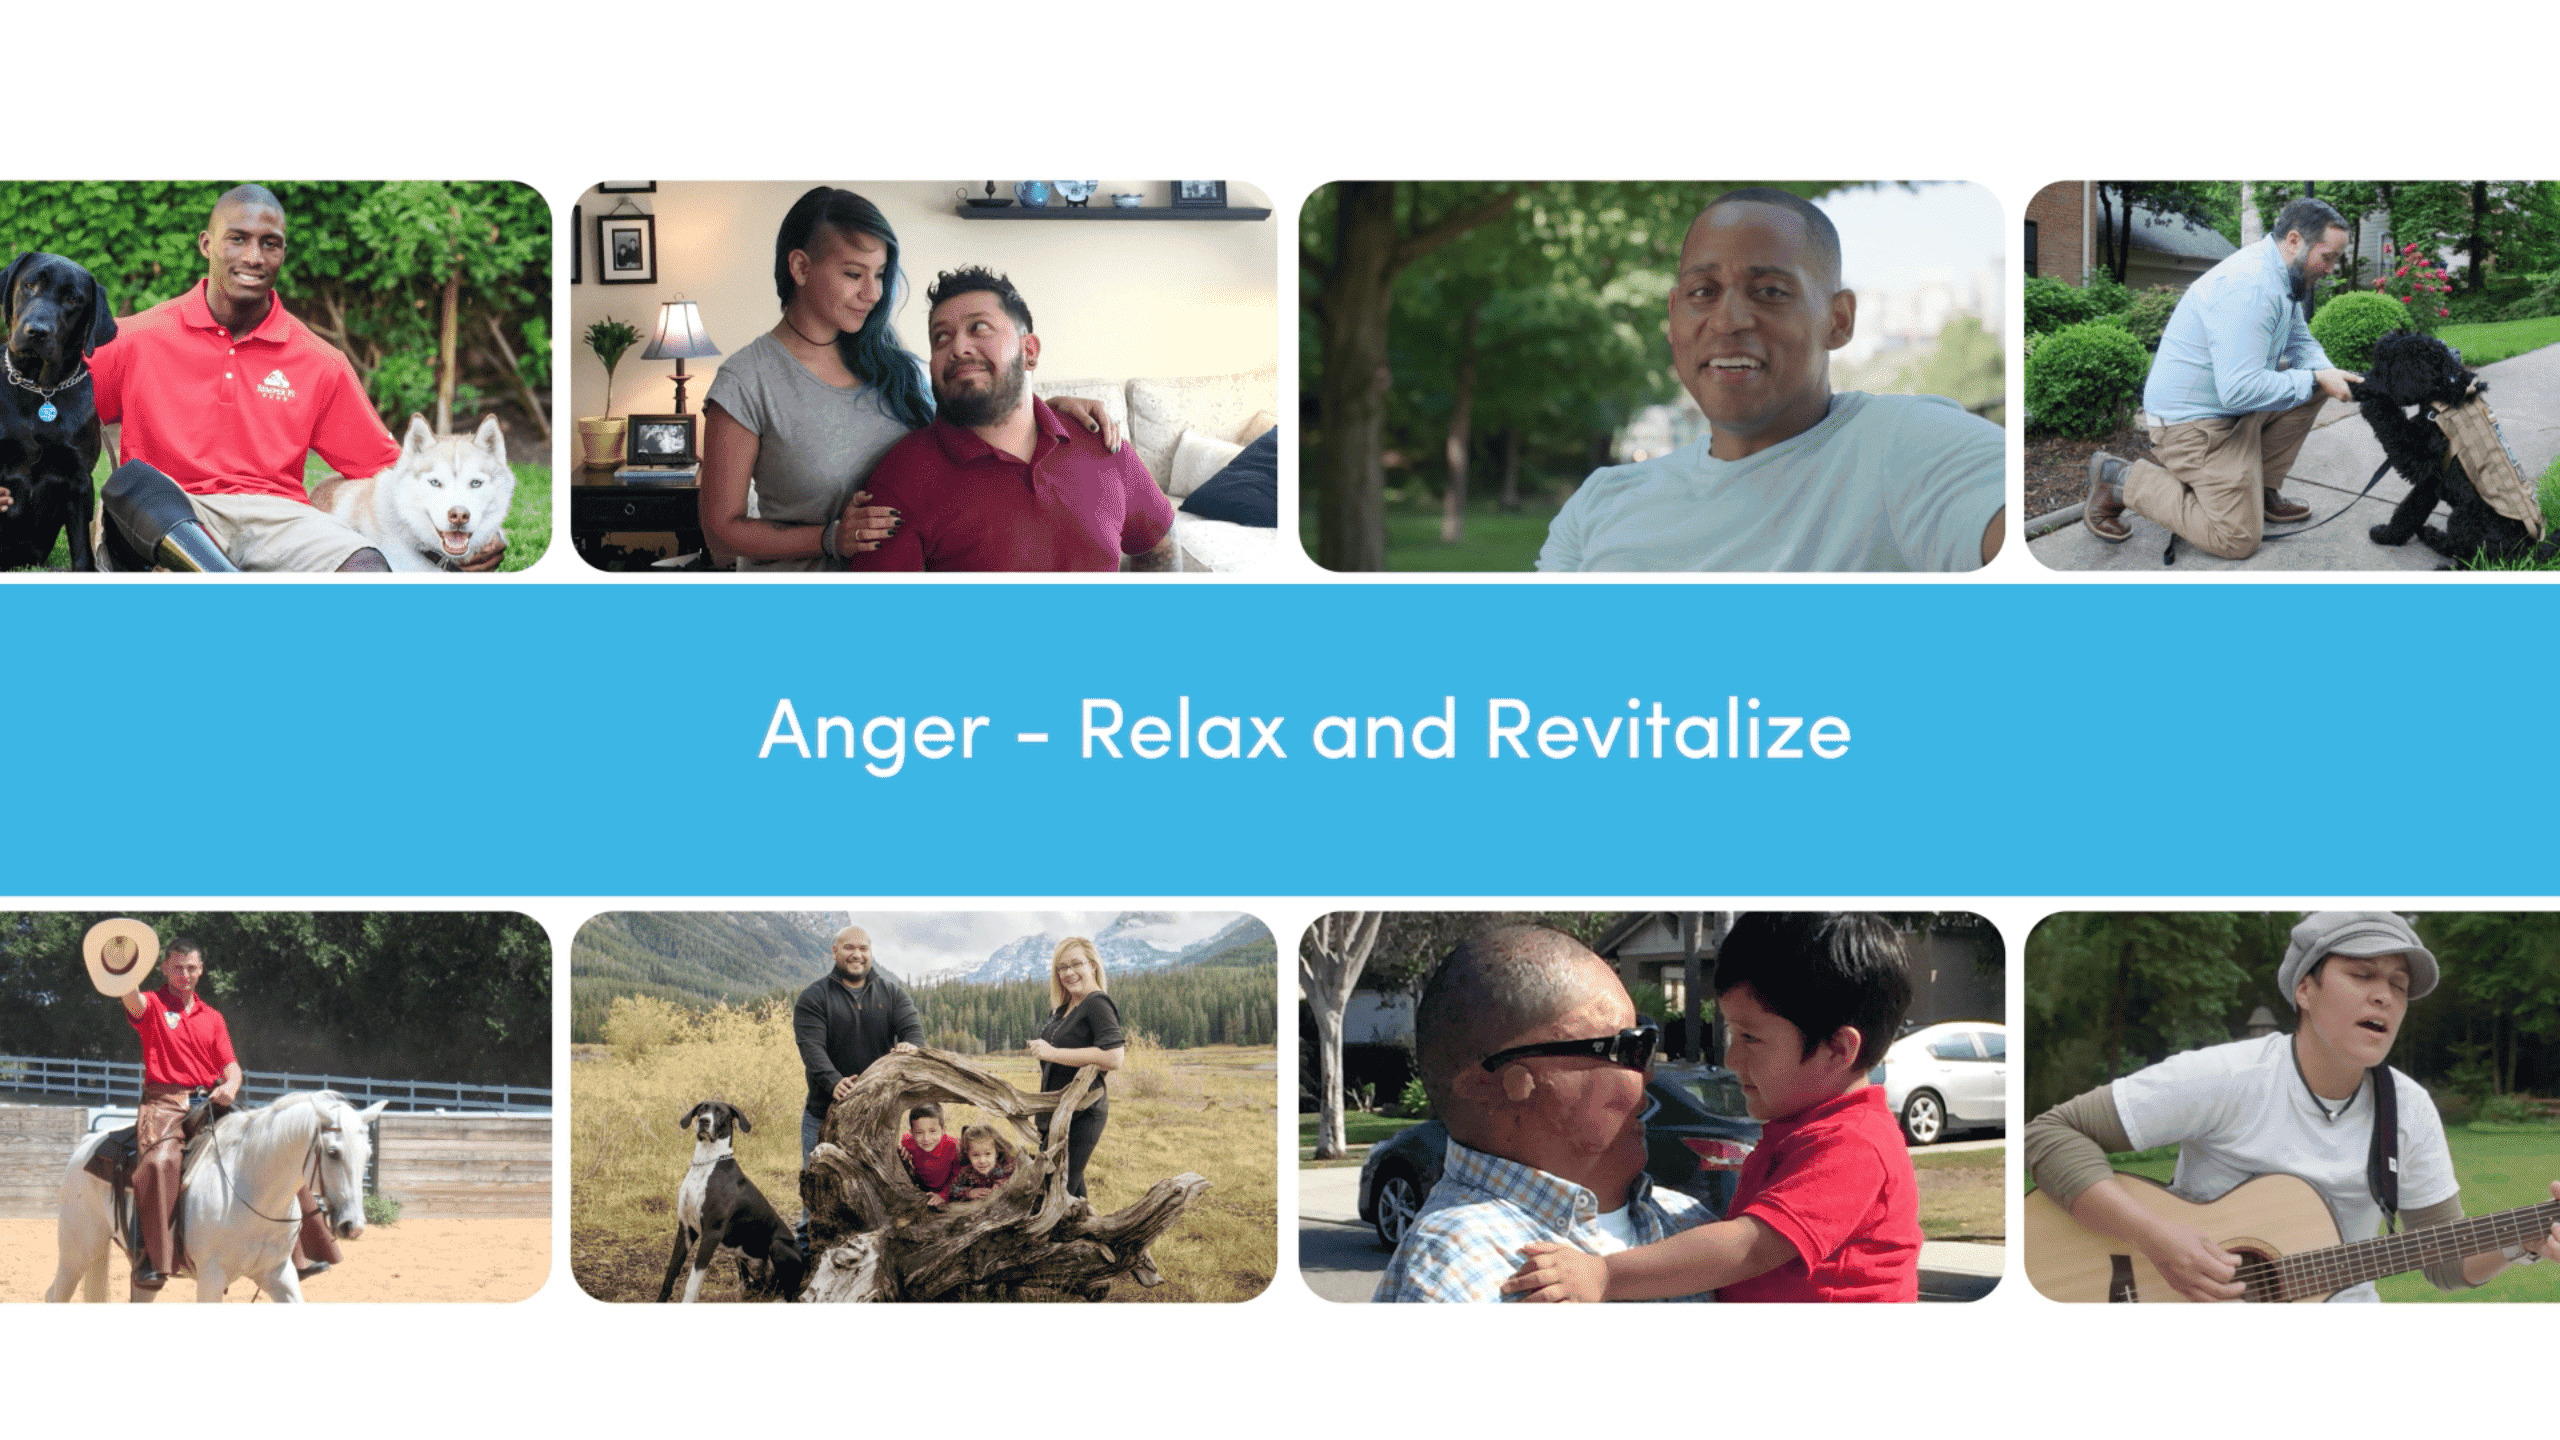 Anger - Relax and Revitalize